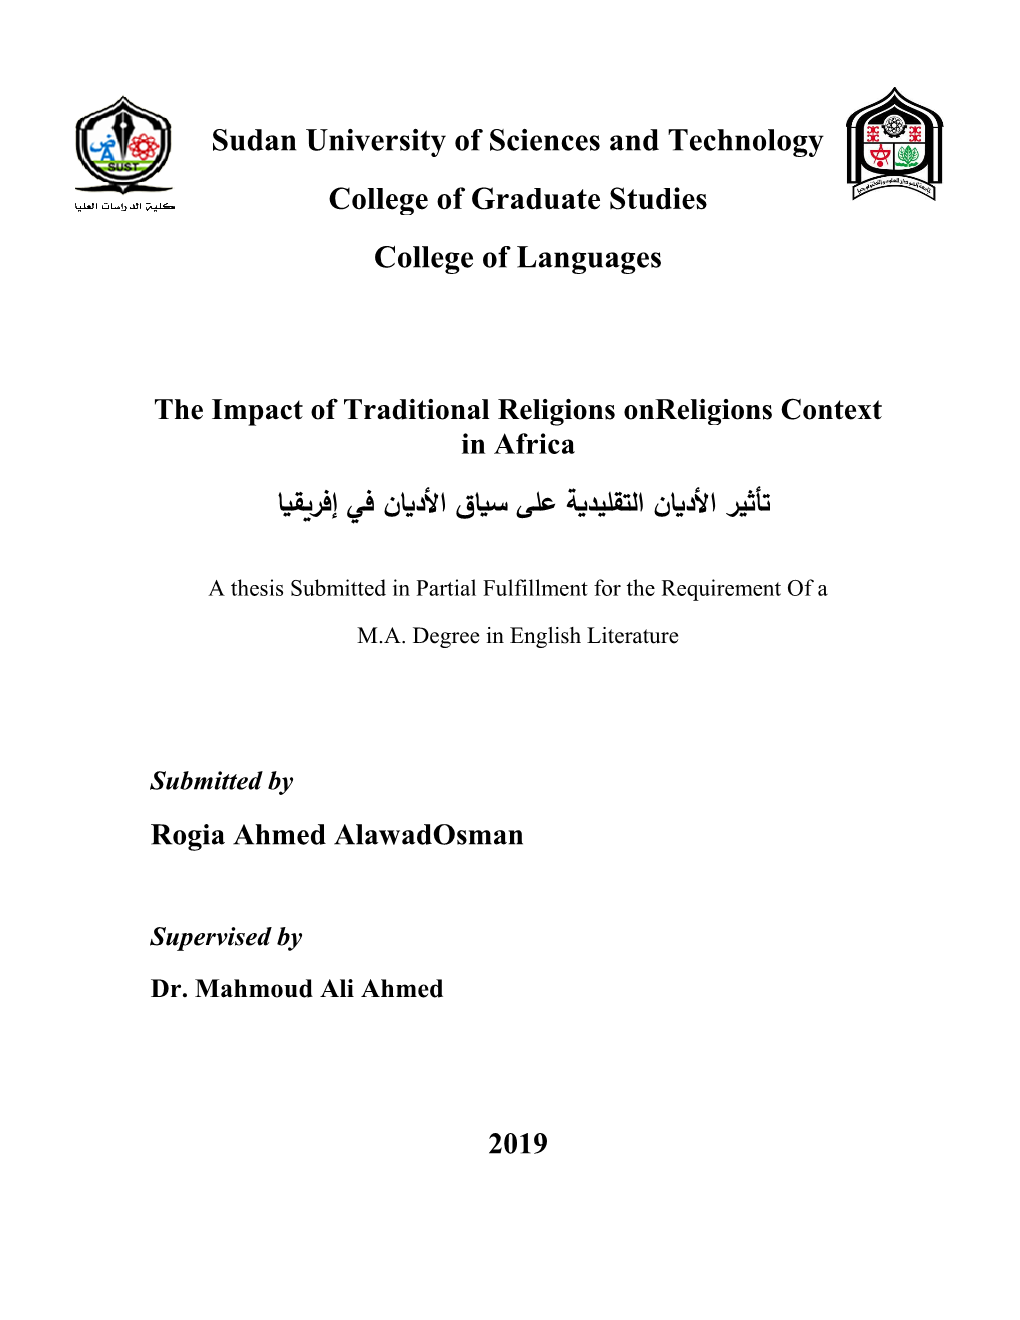 The Impact of Traditional Religions Onreligions Context in Africa.Pdf